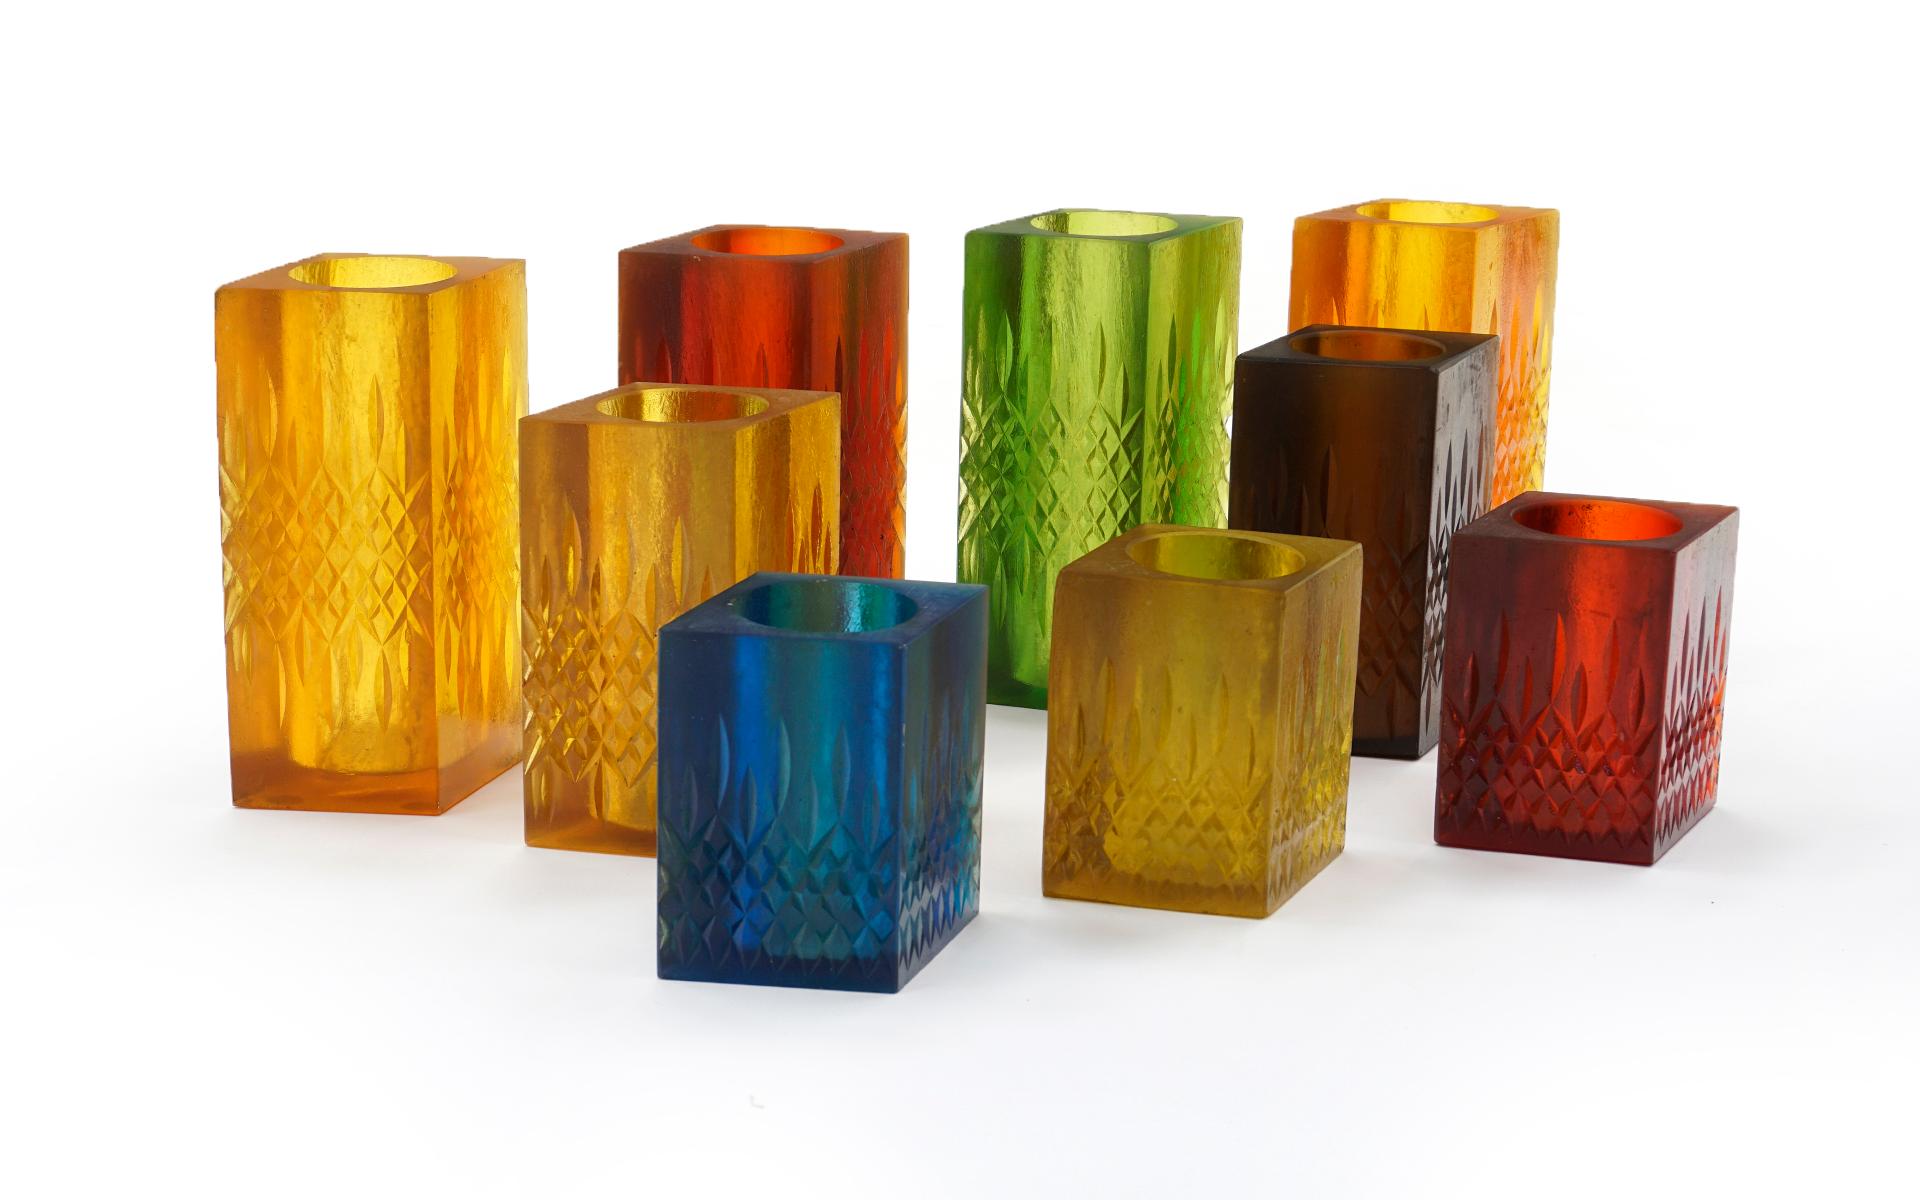 Set of 9 vases / candleholders by Sascha B. (Brastoff). Etched signature at underside. Mulitple colors including red, green, blue, and amber. Each is made of formed resin that is somewhat transparent so the look of these changes depending on the